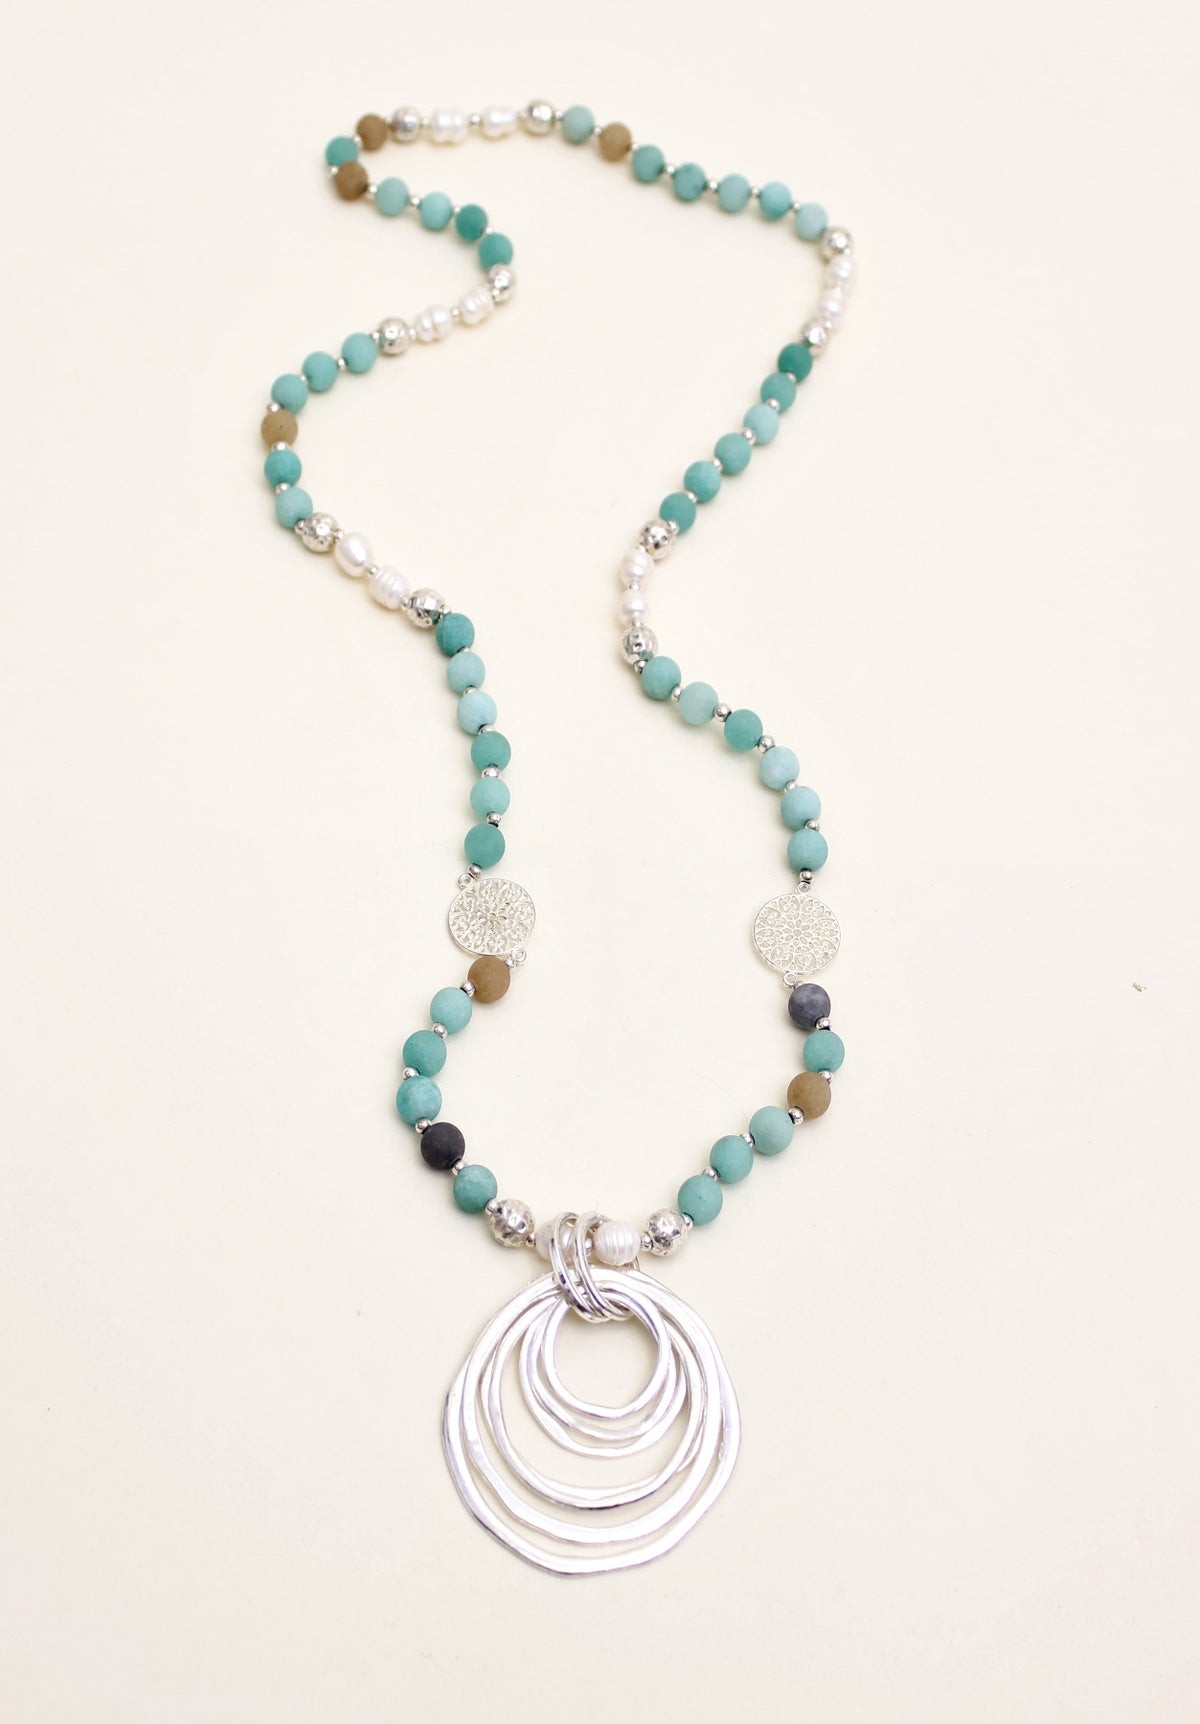 Amazonite Stone and Silver Ring Necklace